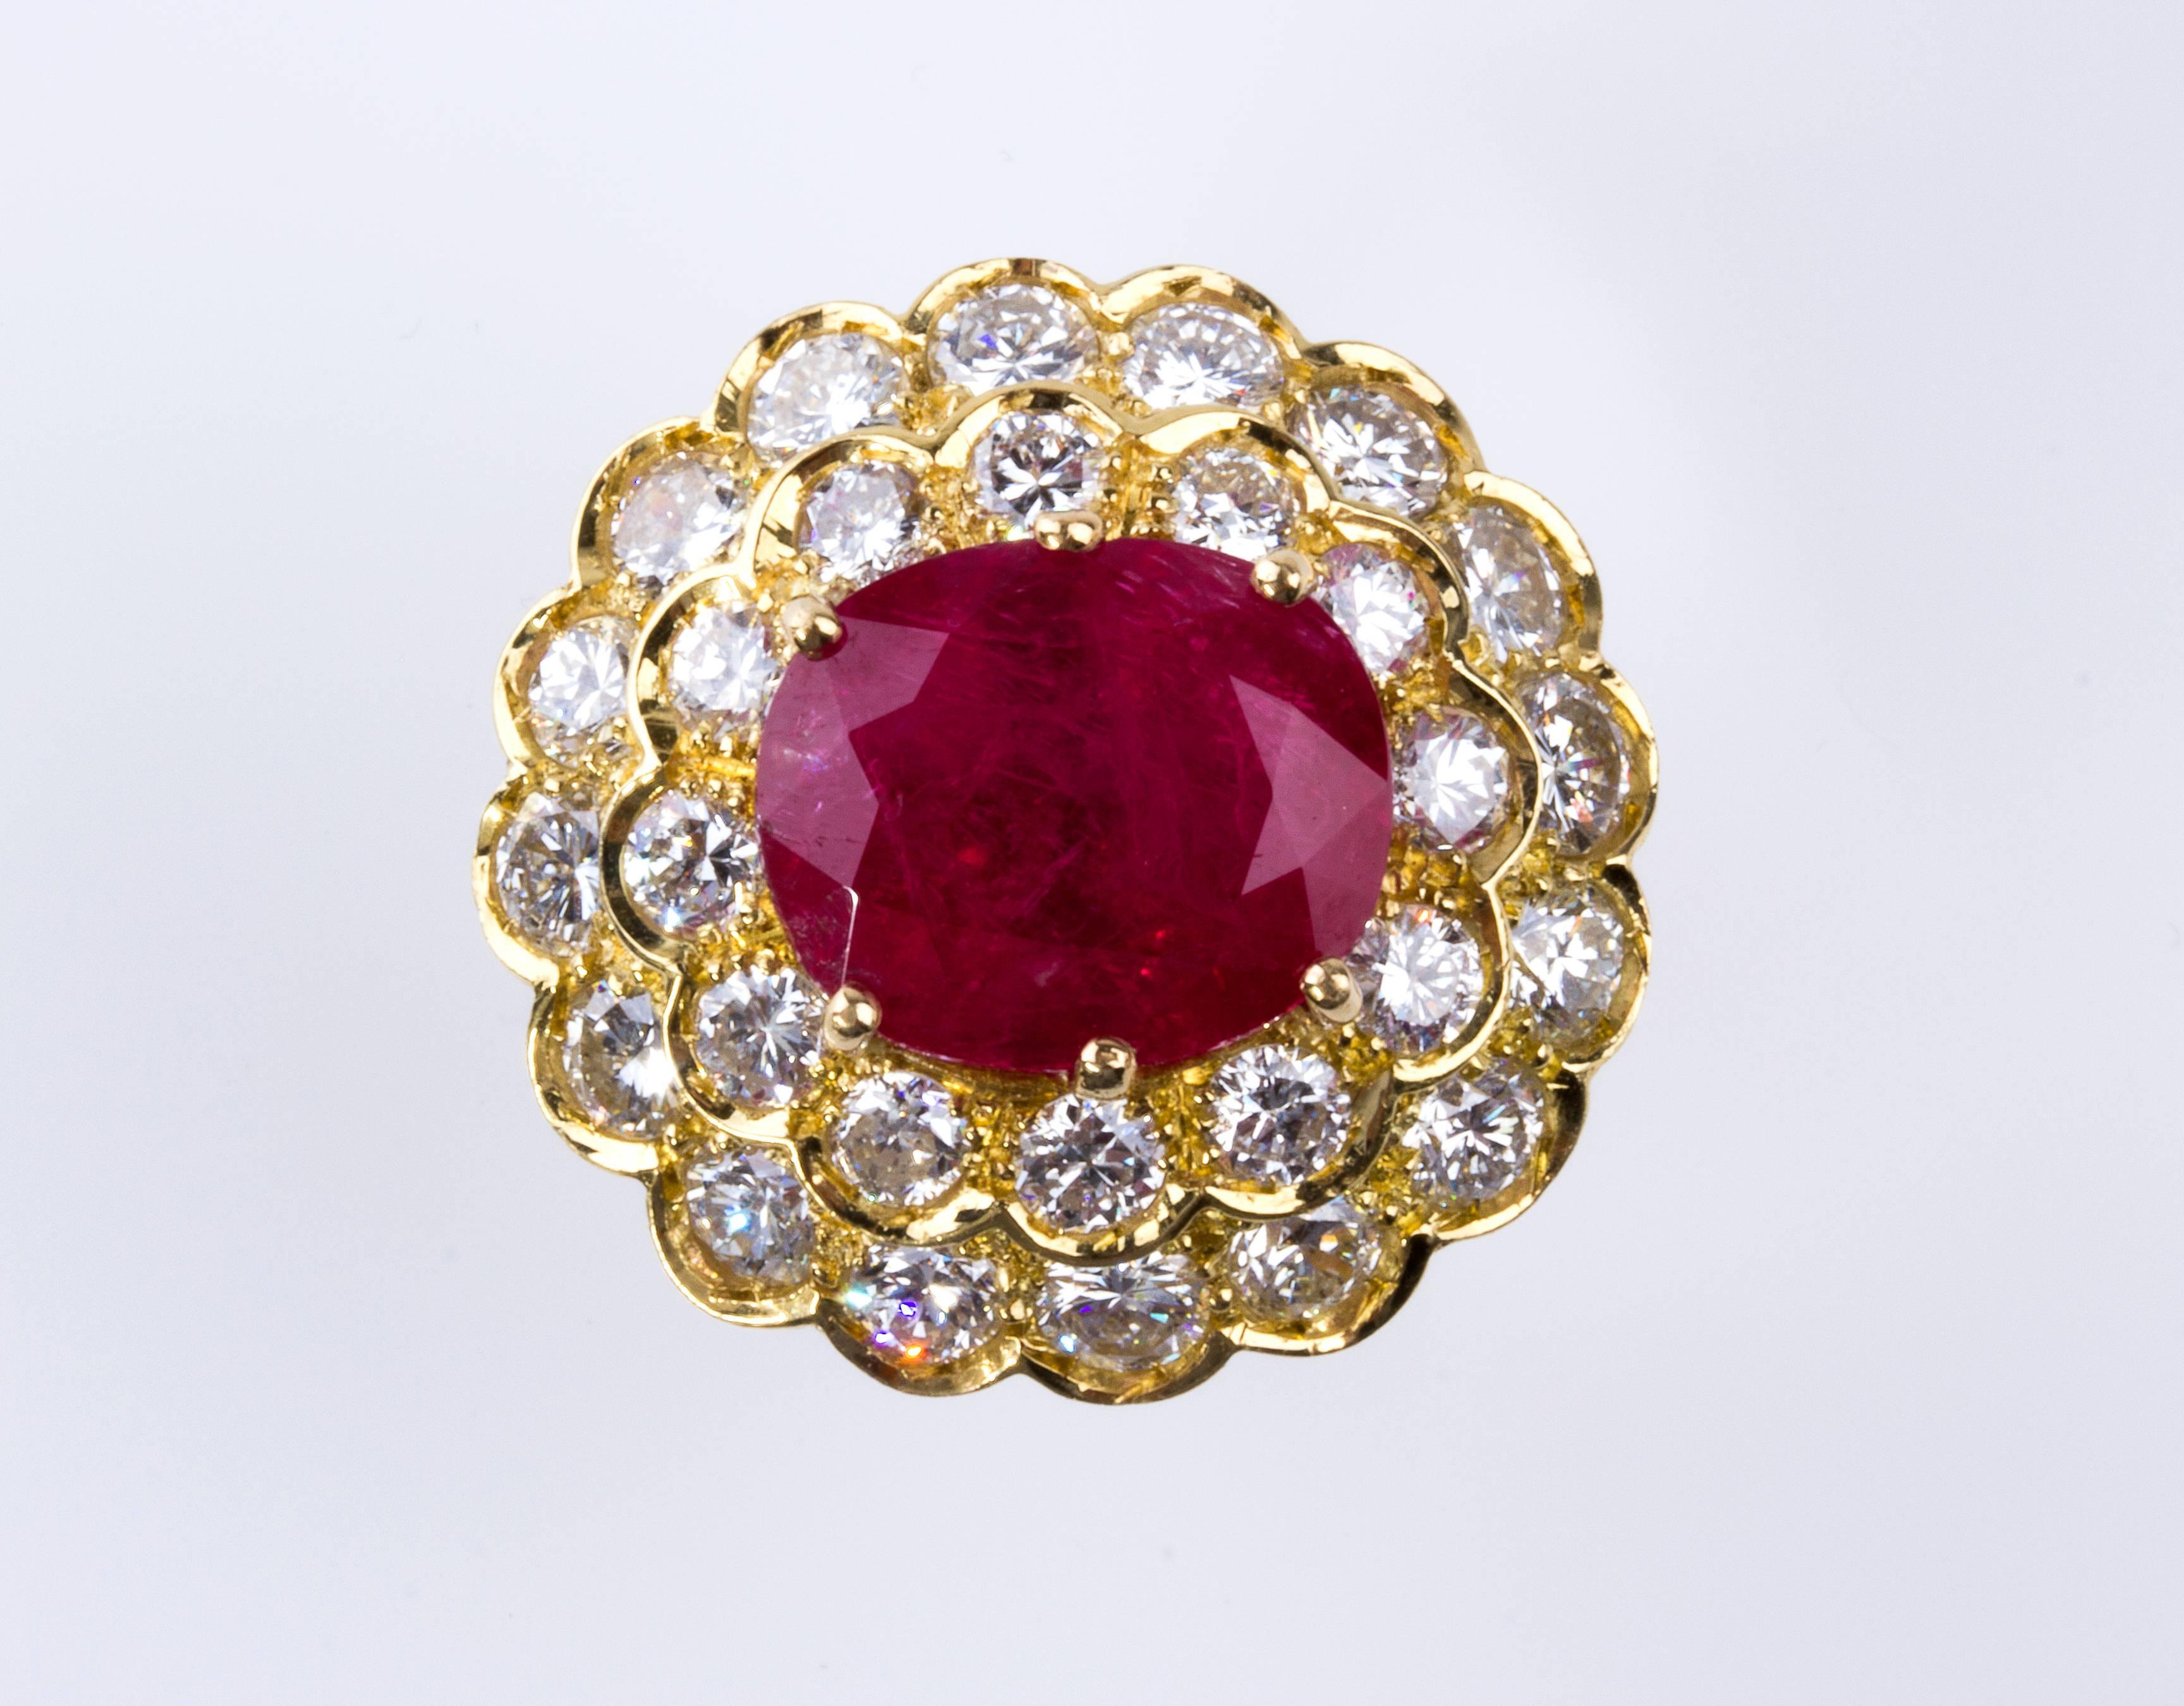 Realized in gold designed as a flower, set brilliant step, cushion shaped ruby, pinkish-red color, weighing 9.07 ct; surrounded by 28 brilliant cut diamonds, VVS clarity, G/H color weighing approximately 3.50 ct. Size US 7 1/2. Weight 13.6 gr.